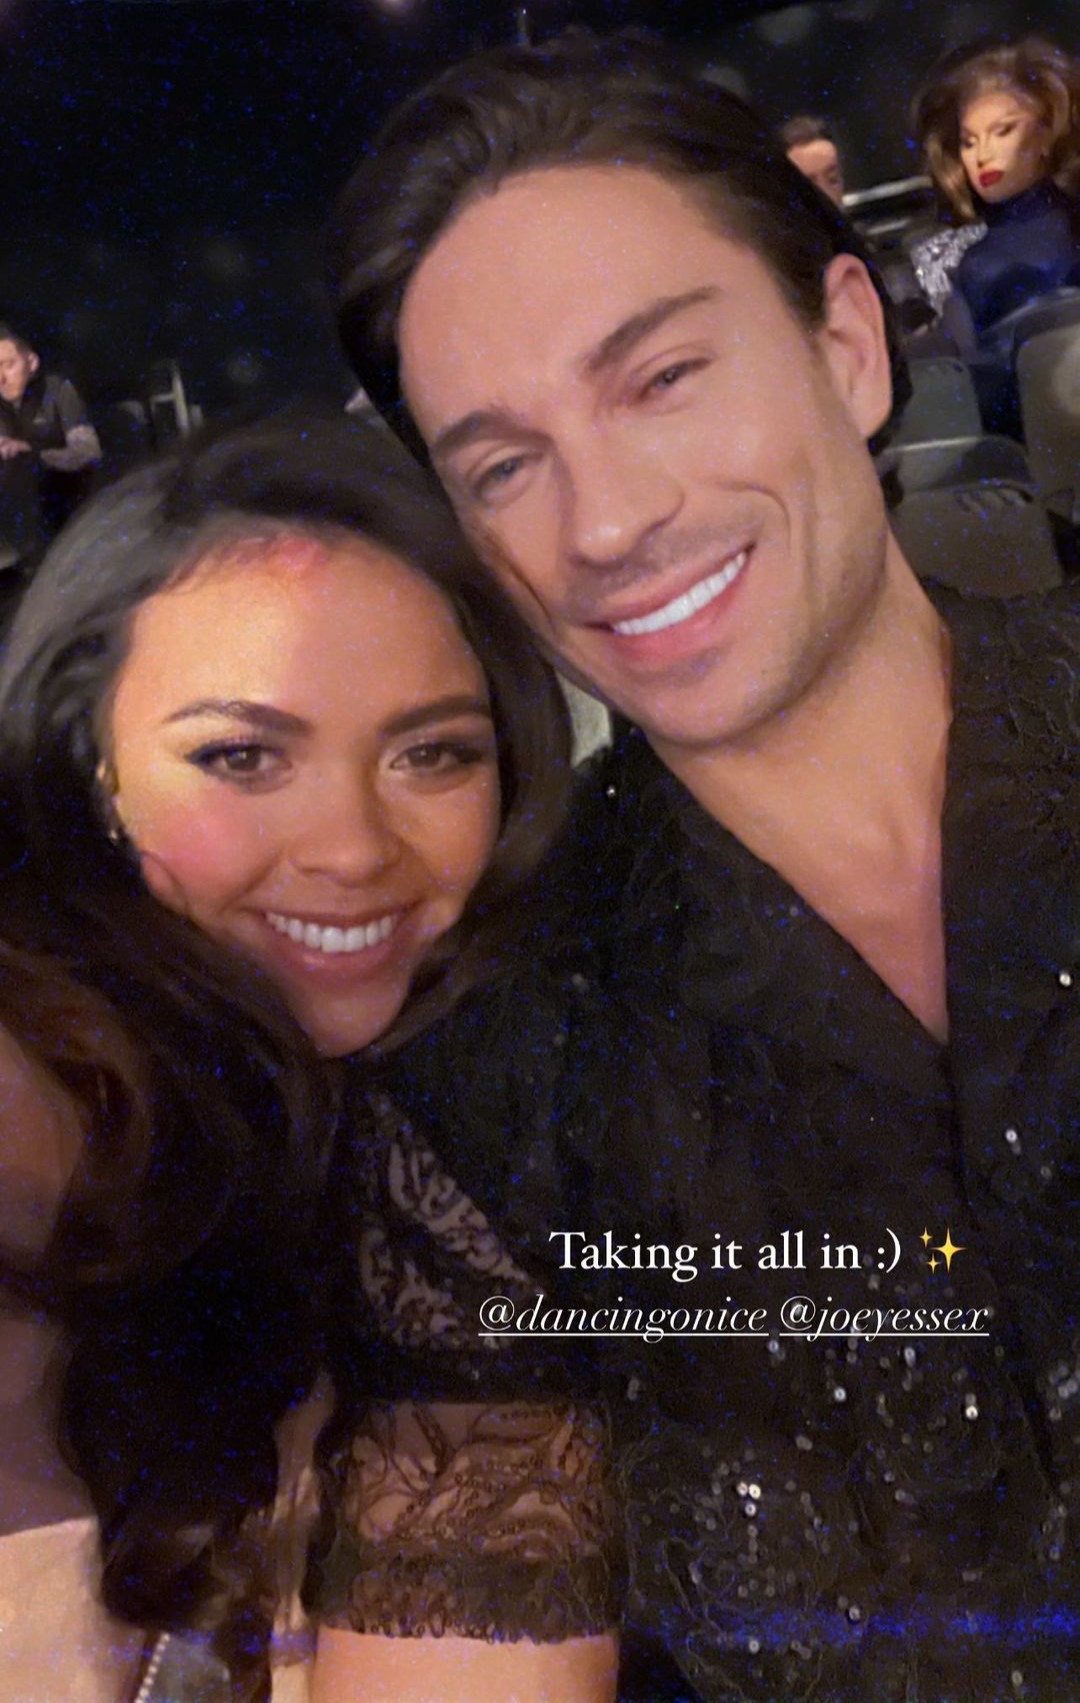 Dancing on Ice’s Joey Essex shares loved-up photo with Vanessa Bauer ahead of semi-final